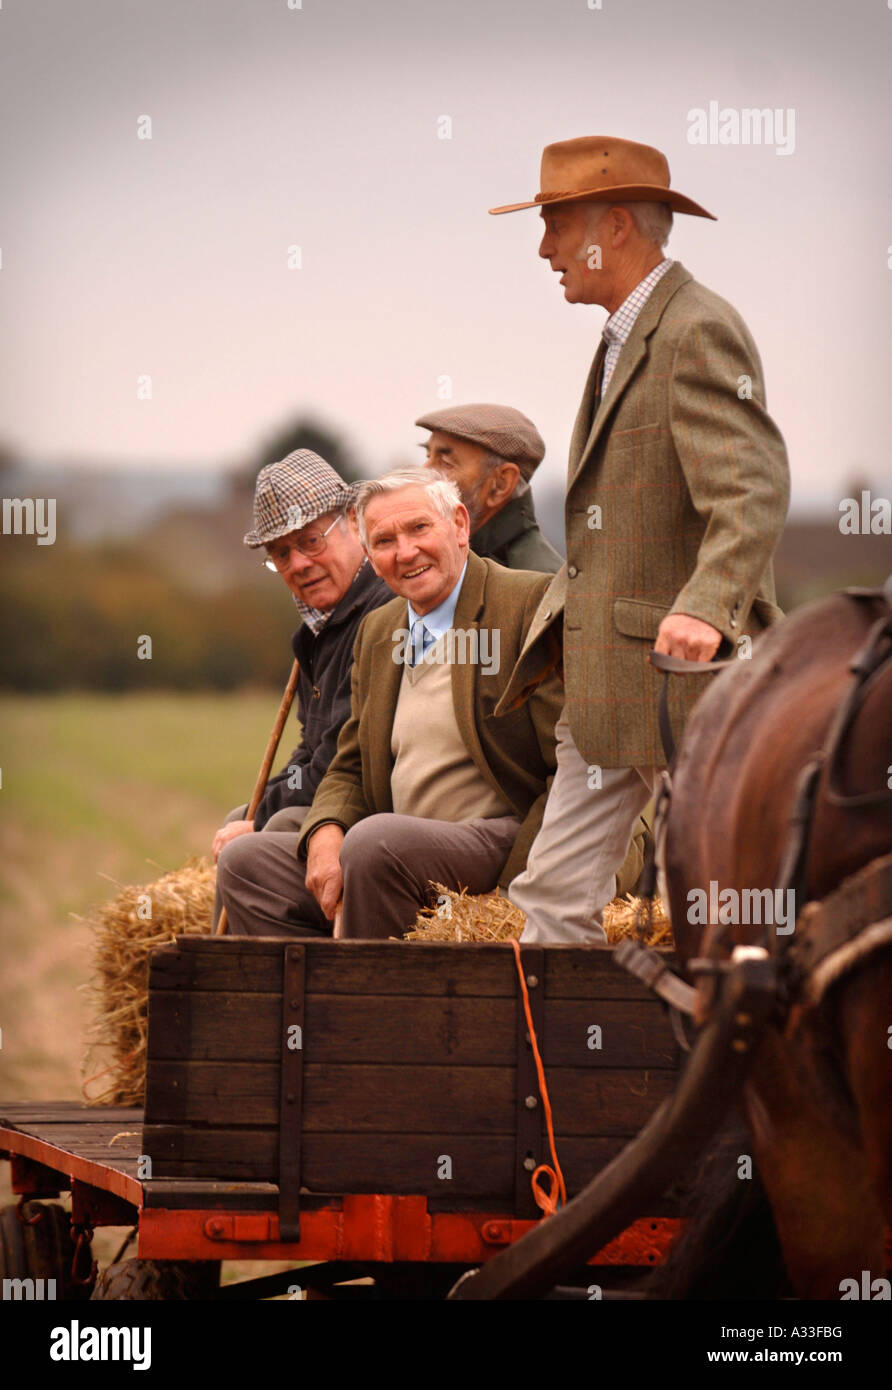 FOUR RETIRED GENTLEMEN ENJOY A RIDE ON A HORSE DRAWN CART AT THE NATIONAL HEDGELAYING CHAMPIONSHIPS Stock Photo